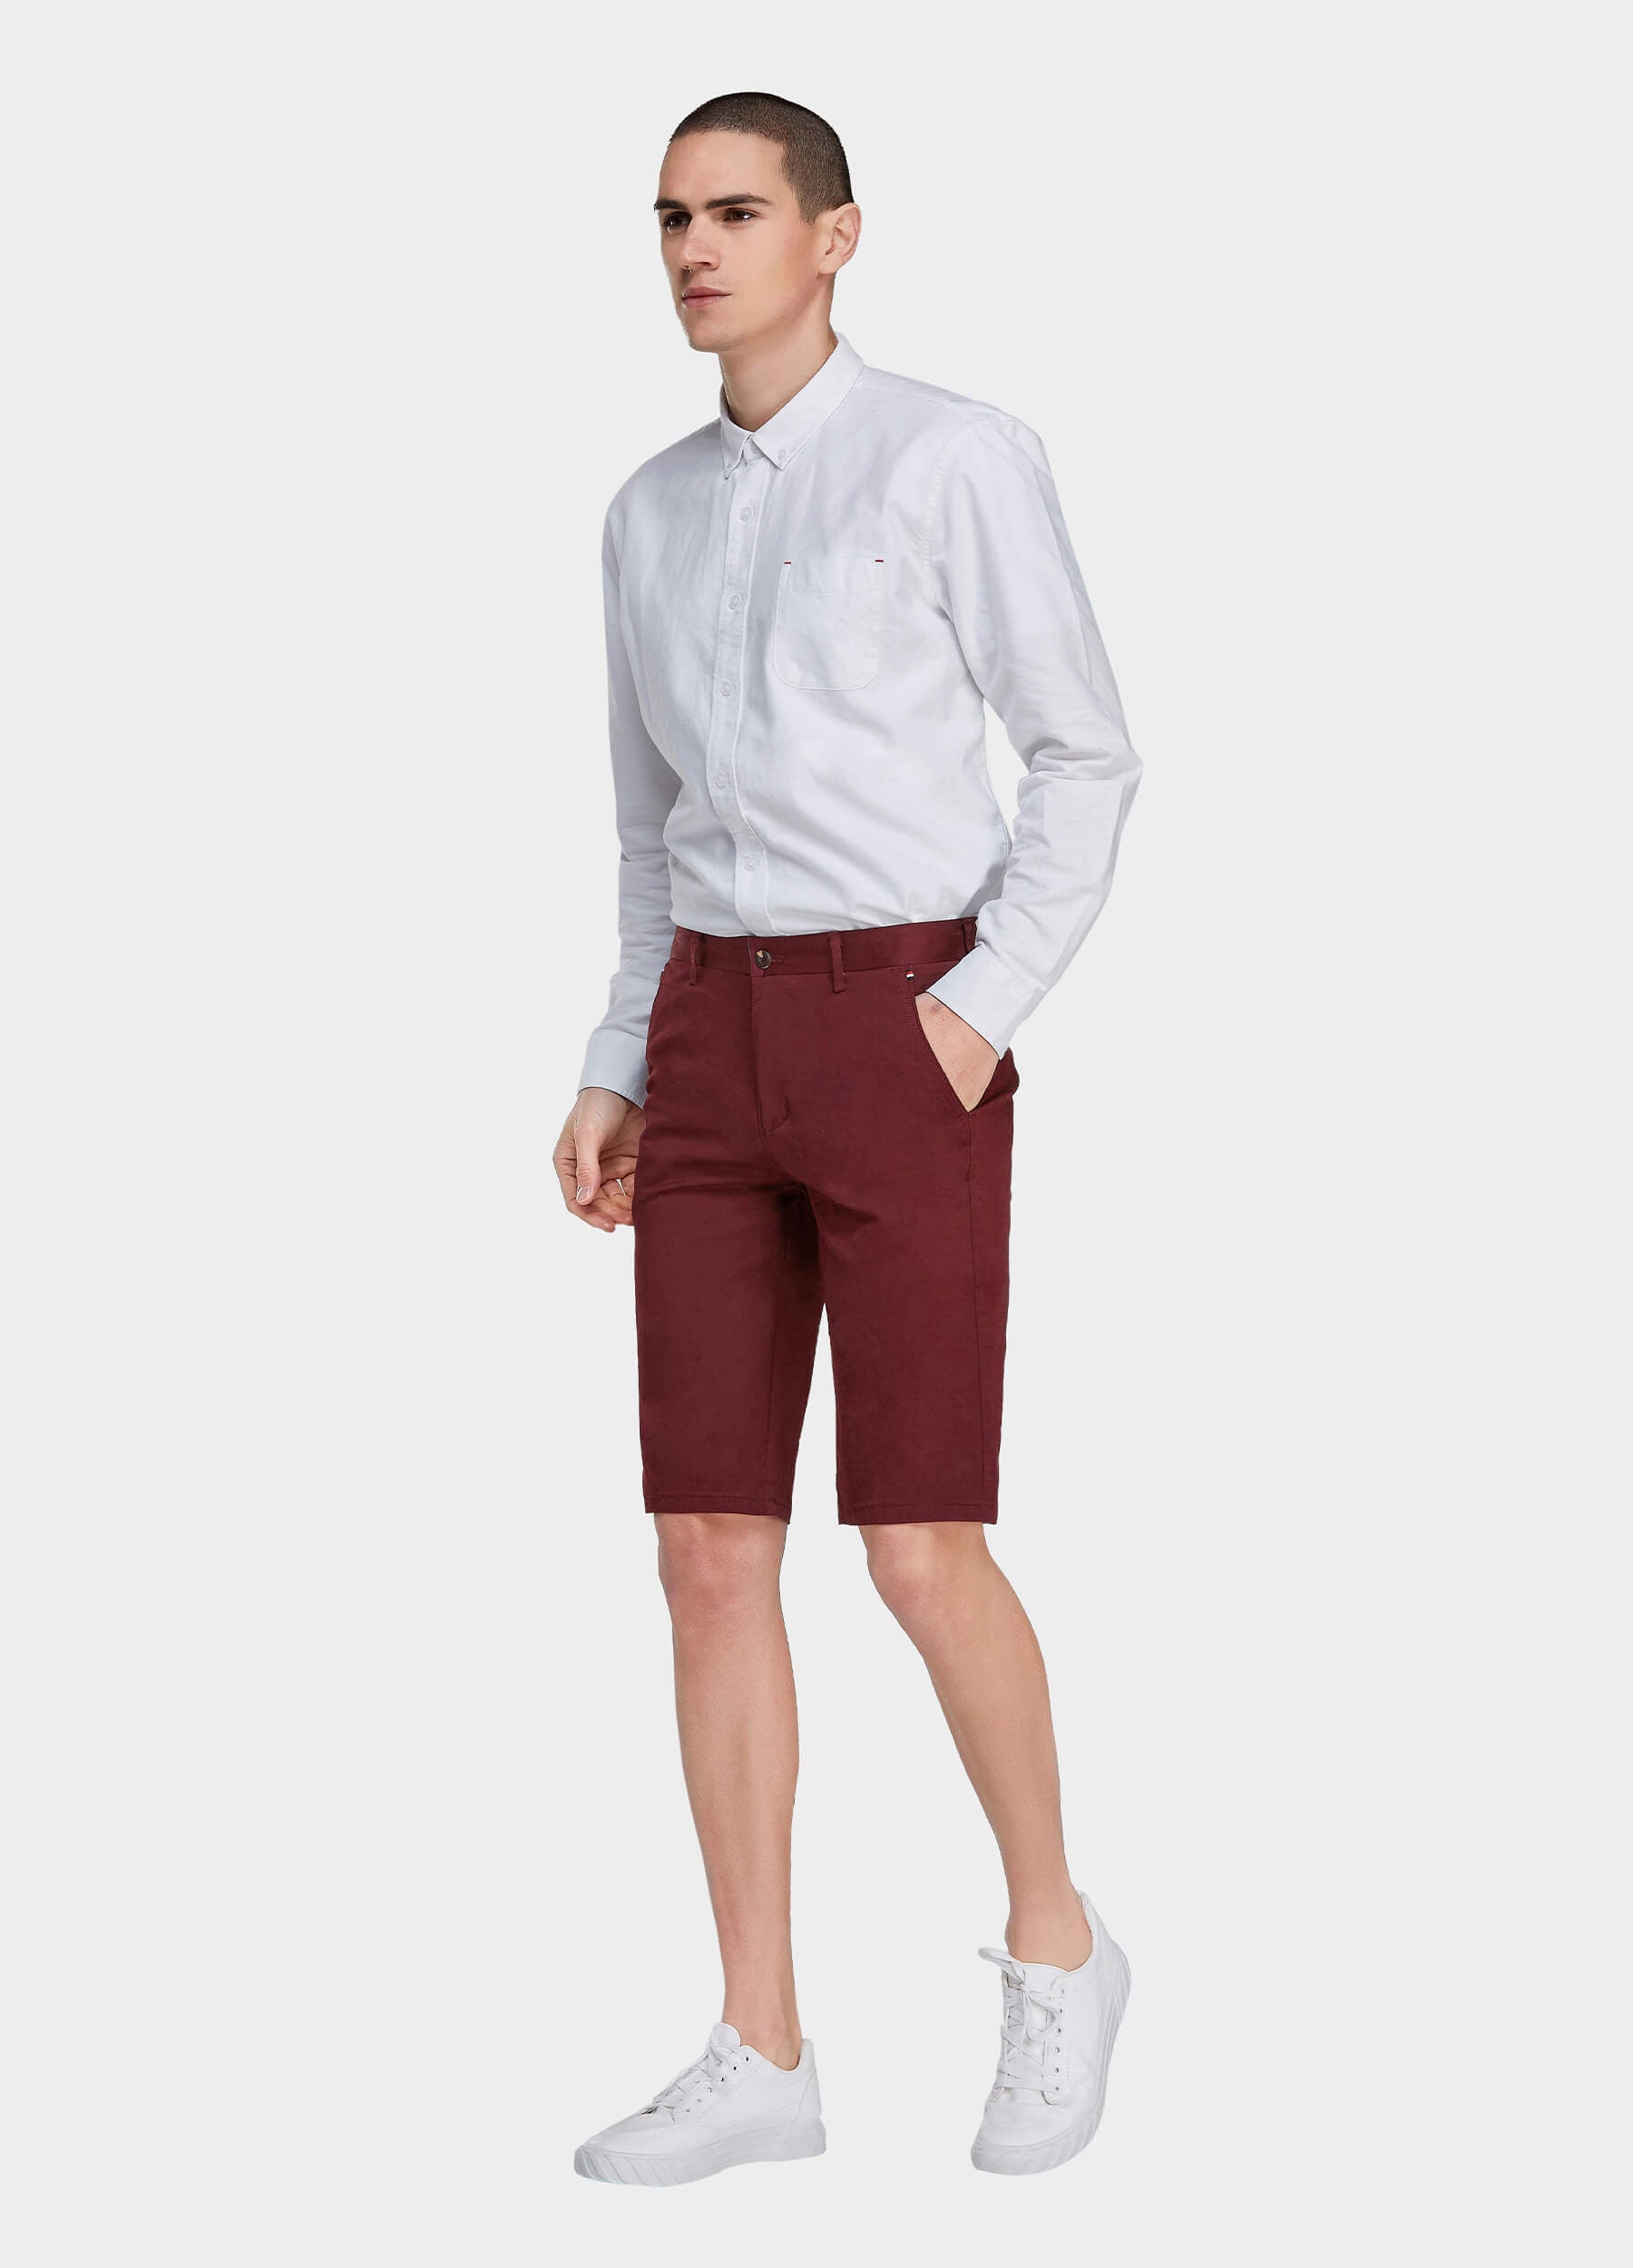 Men's Casual Button Closure Zipper Elasticity Solid Shorts with Slant Pocket-Wine Red sideview